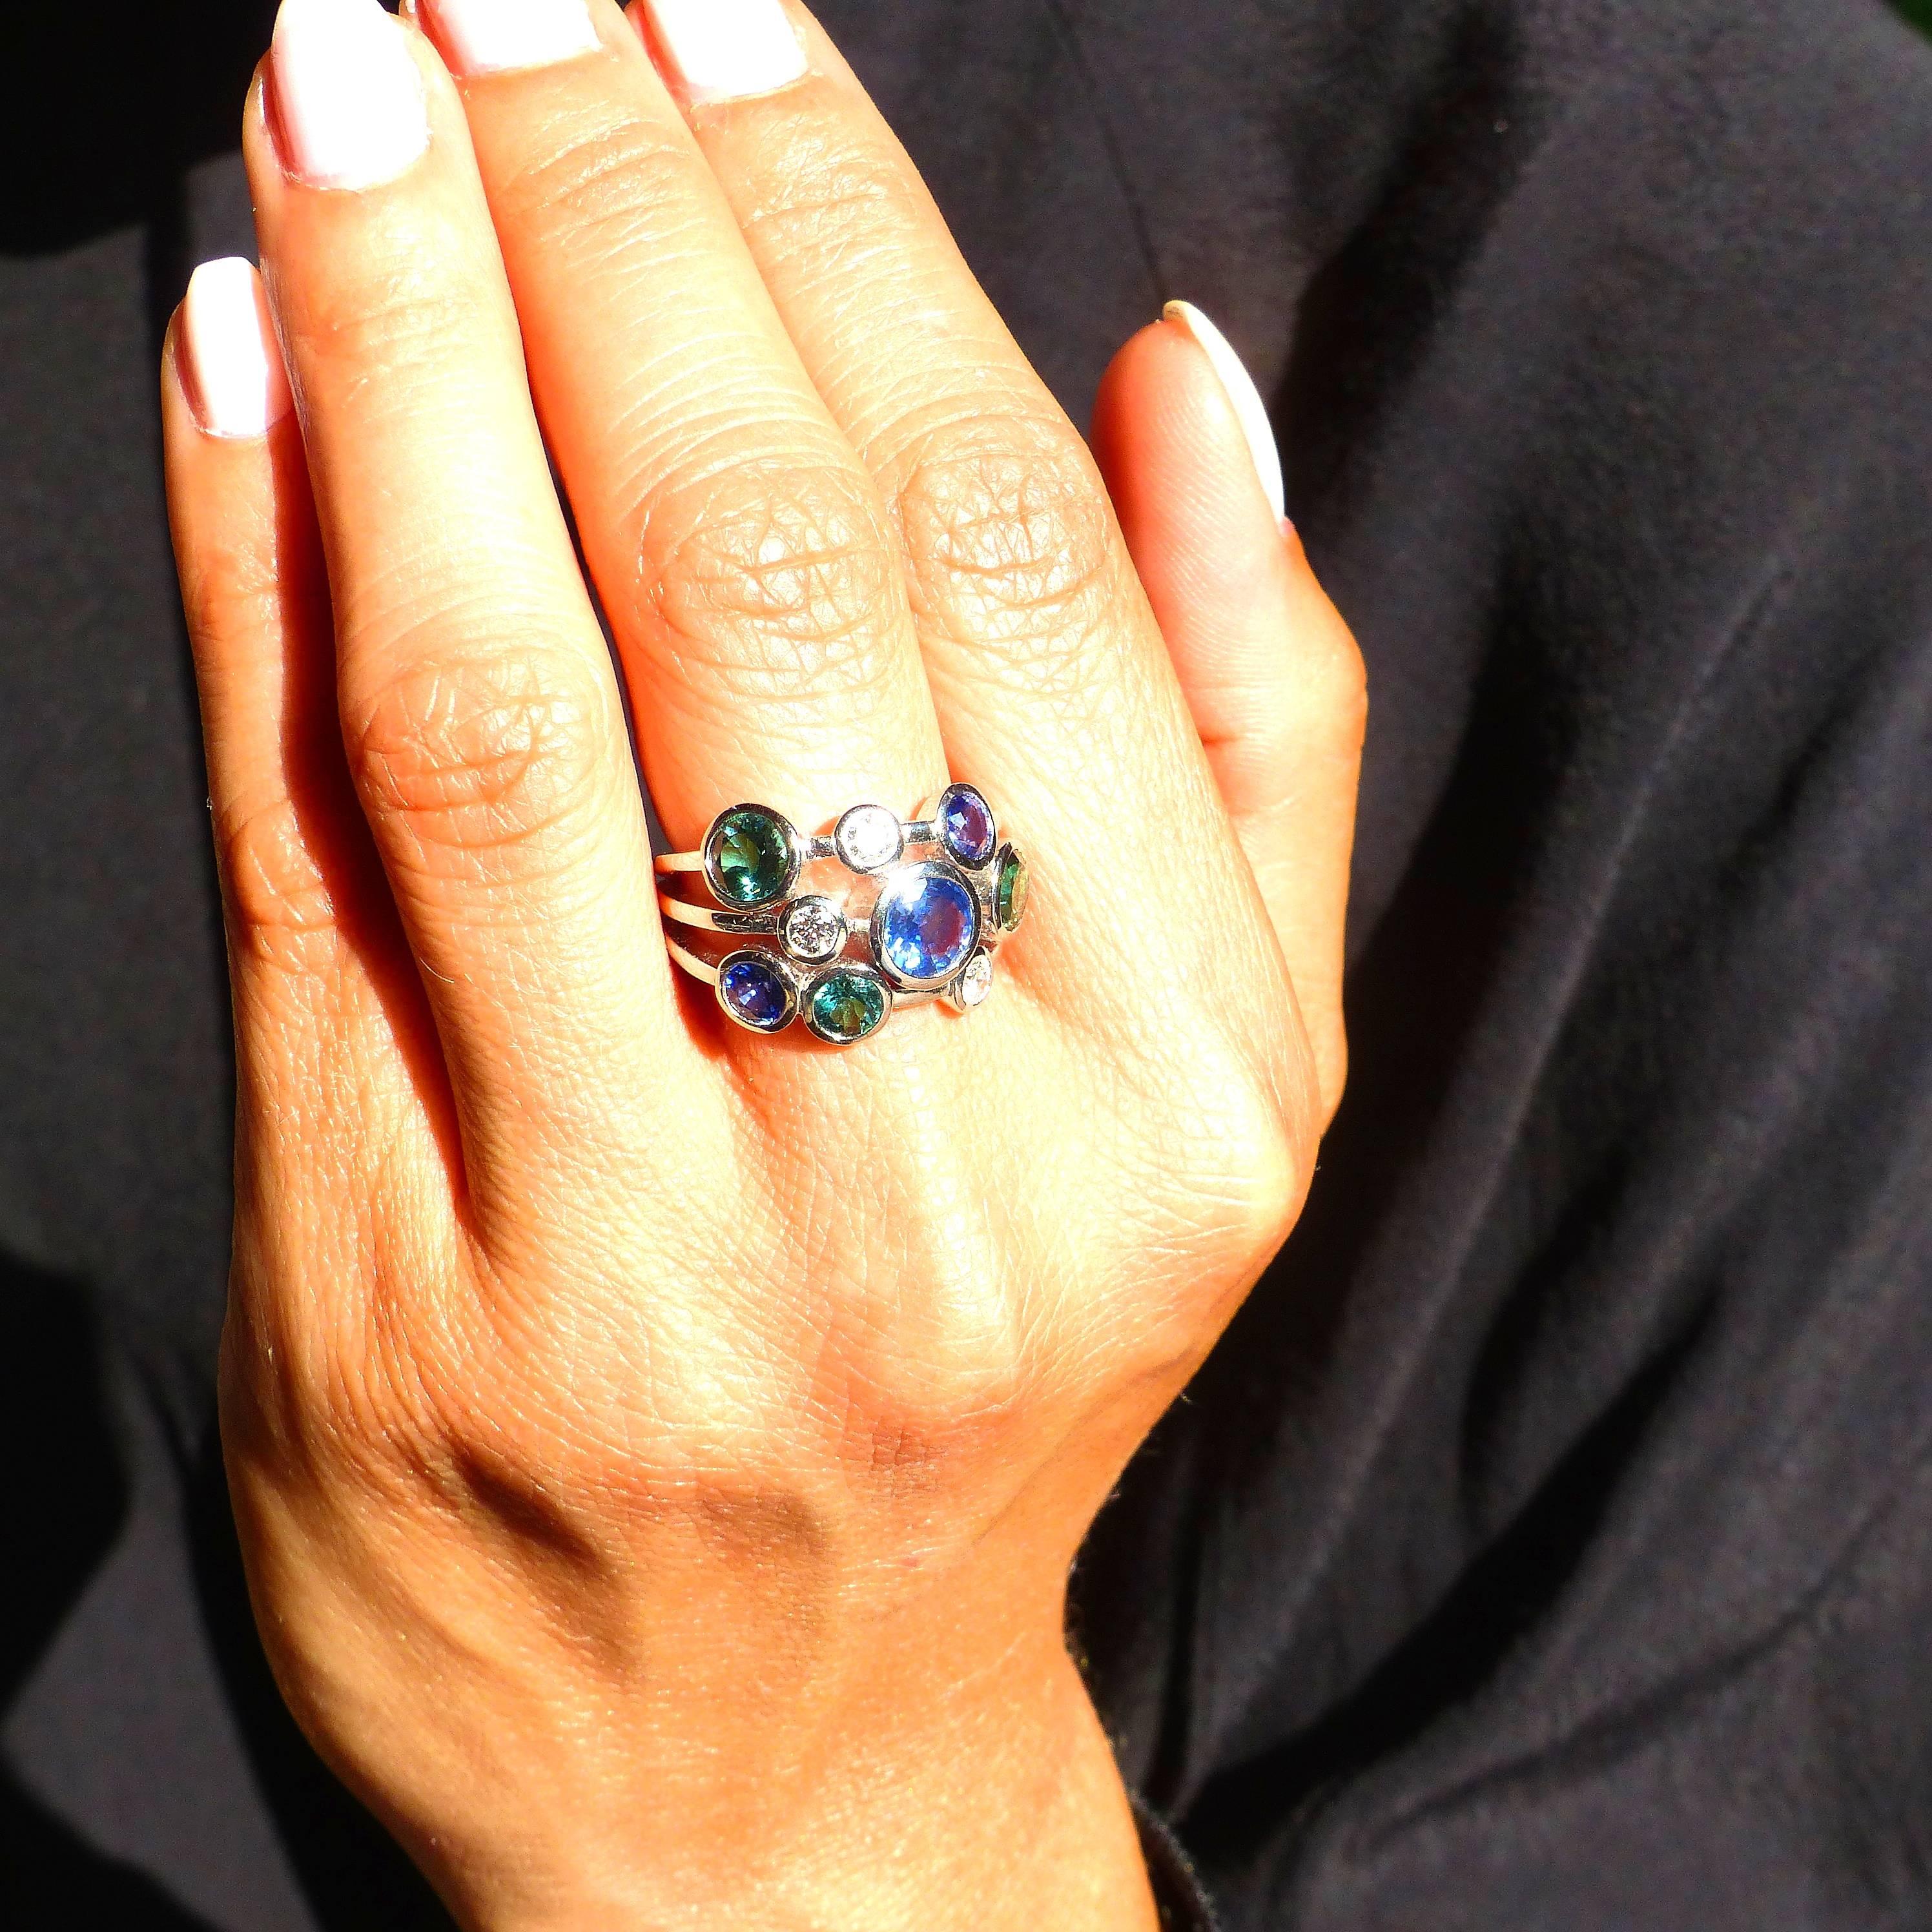 Round Cut Ring in White Gold with Sapphires and Tourmalines and Diamonds. For Sale